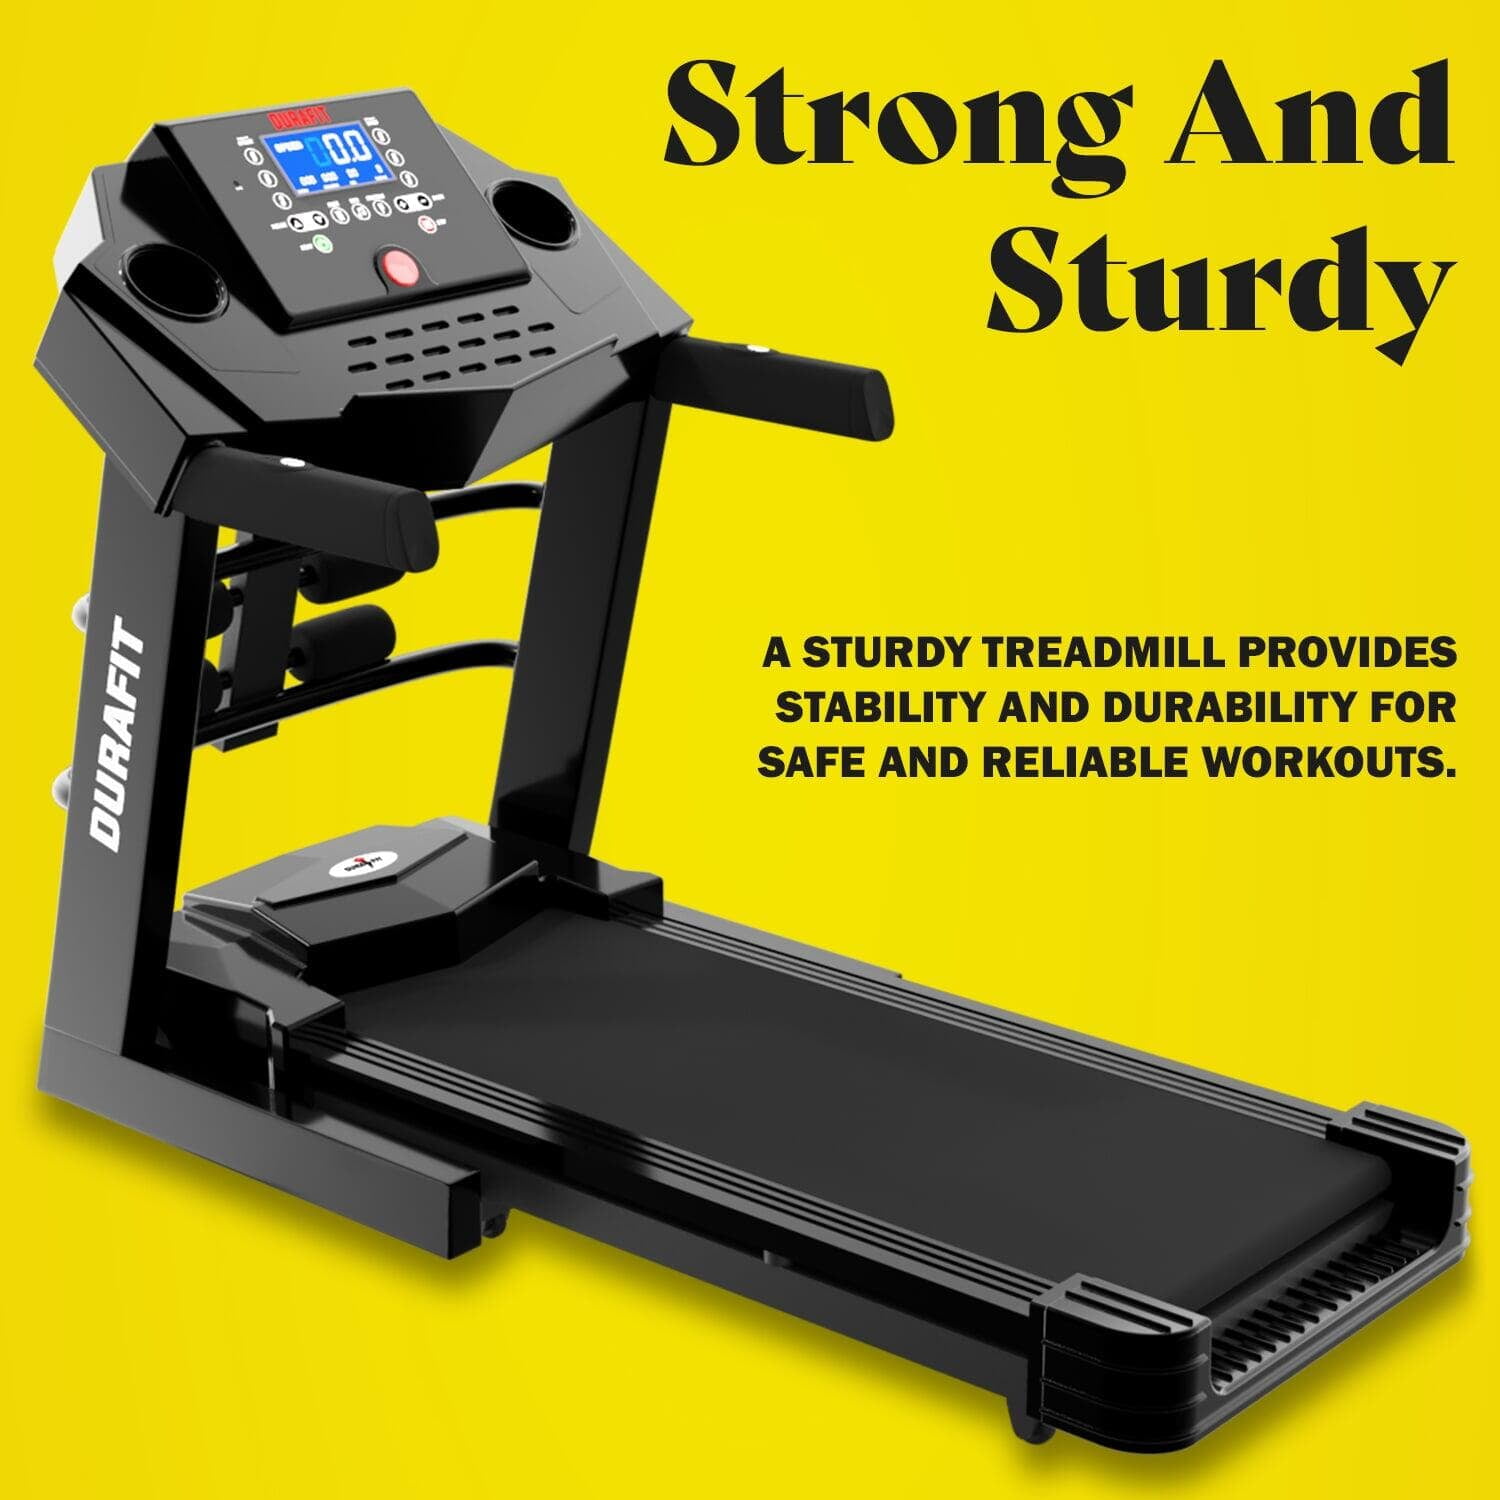 Durafit Heavy Multifunction Treadmill with Wide Running Surface